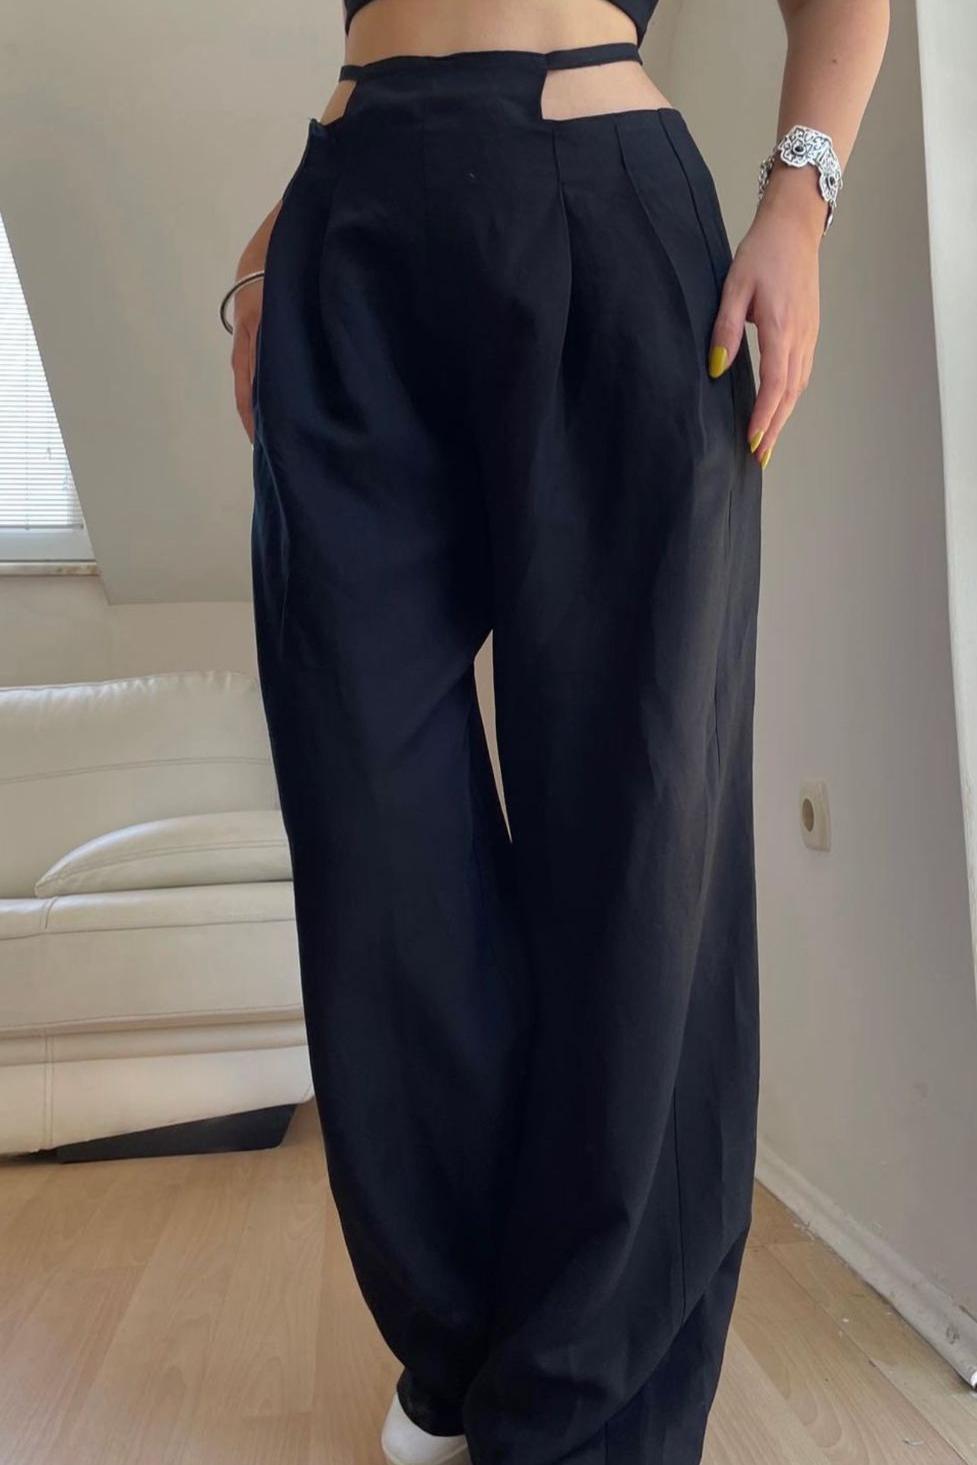 Chic black high waisted pants - SUGERCANDY